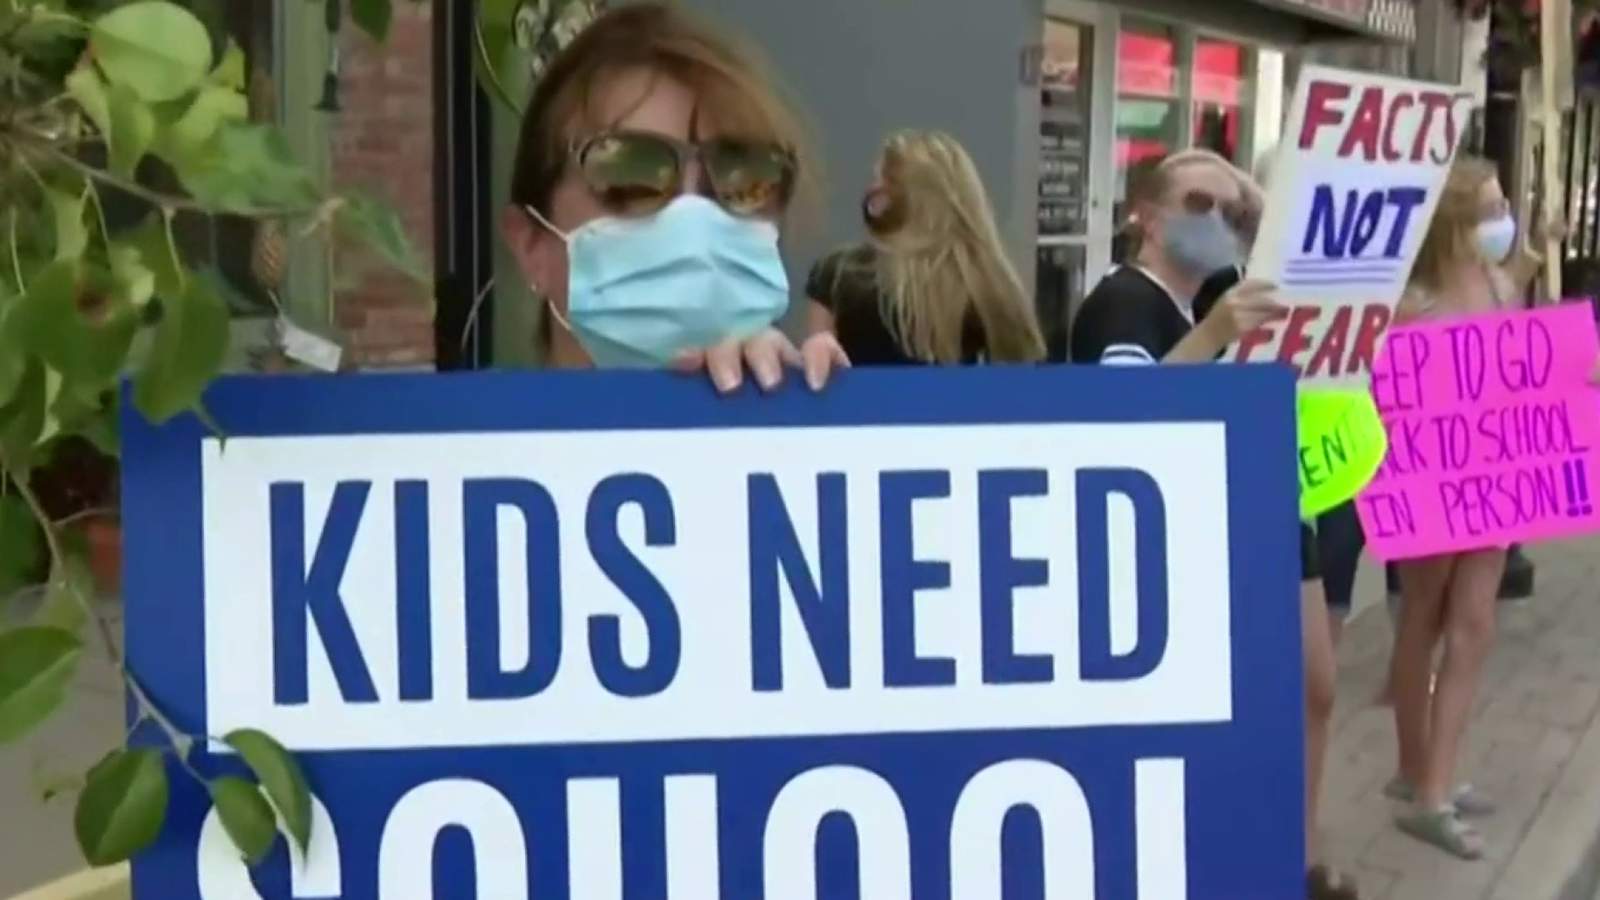 Protest held in South Lyon as parents, students push for return to classroom amid COVID-19 pandemic